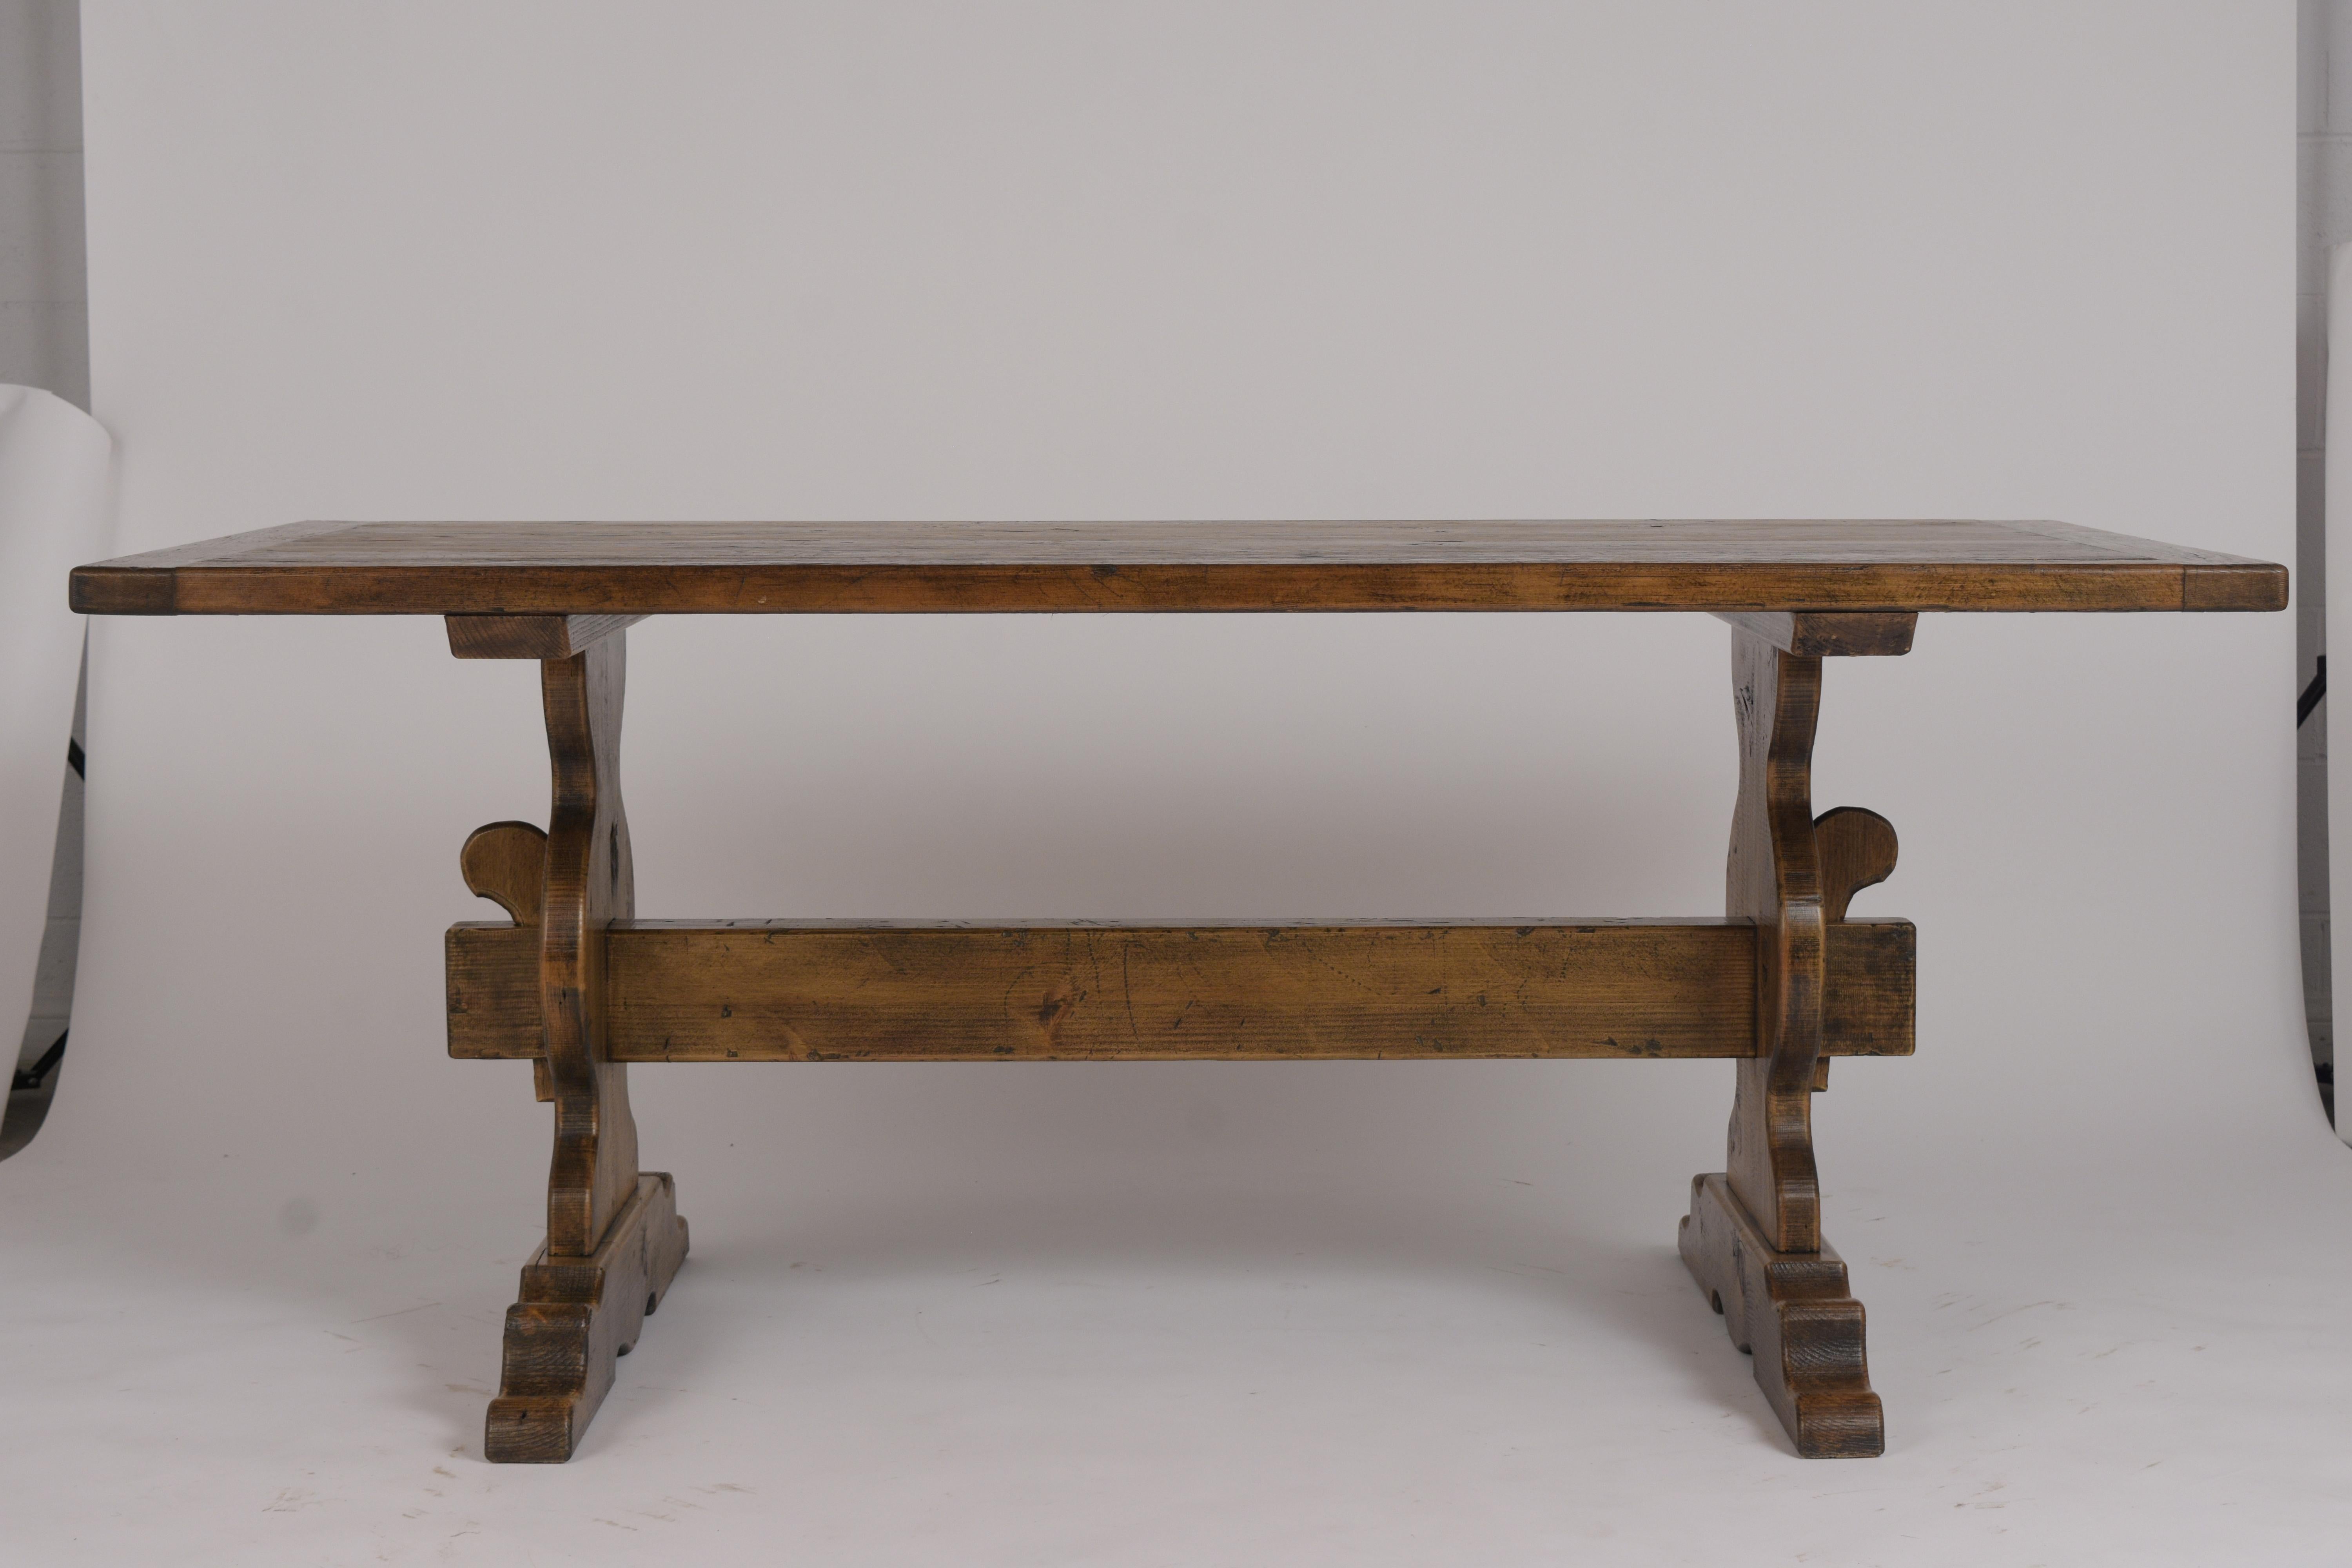 This 1950s French Provincial style dining table is made out of solid pine wood and is in great condition. It has been newly stained in walnut color, waxed and polished developing a beautiful patina finish. This dining table featured a rectangular